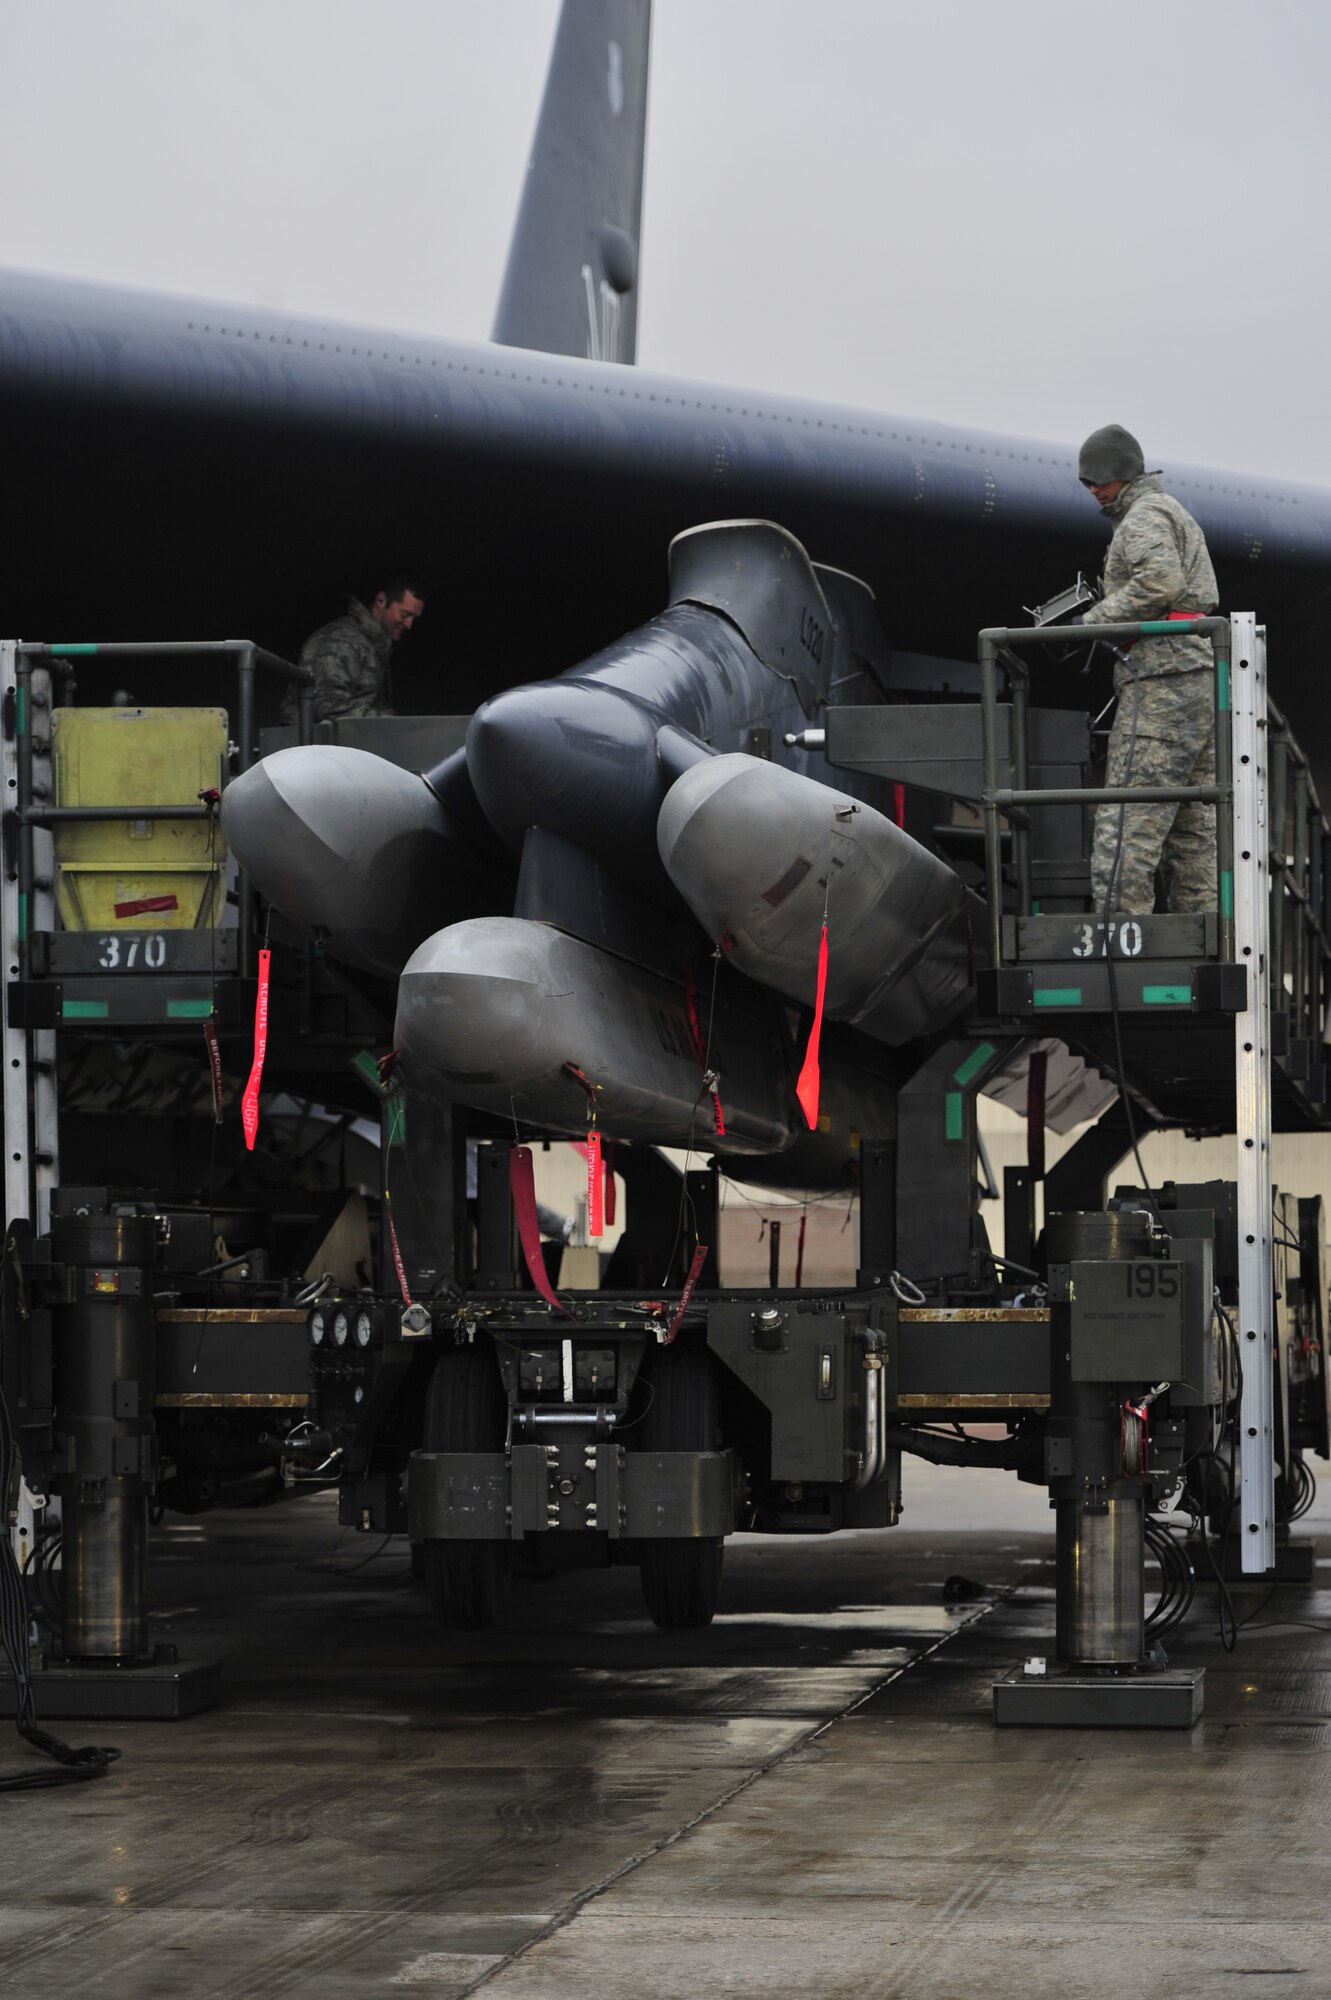 Airmen from the 5th Maintenance Group make final inspections on the missiles on a B-52H Stratofortress, Nov. 1, 2013. The team was preparing the jet’s assets for a rapid launch, which was part of a Nuclear Operational Readiness Inspection. (U.S. Air Force photo/Senior Airman Kristoffer Kaubisch)